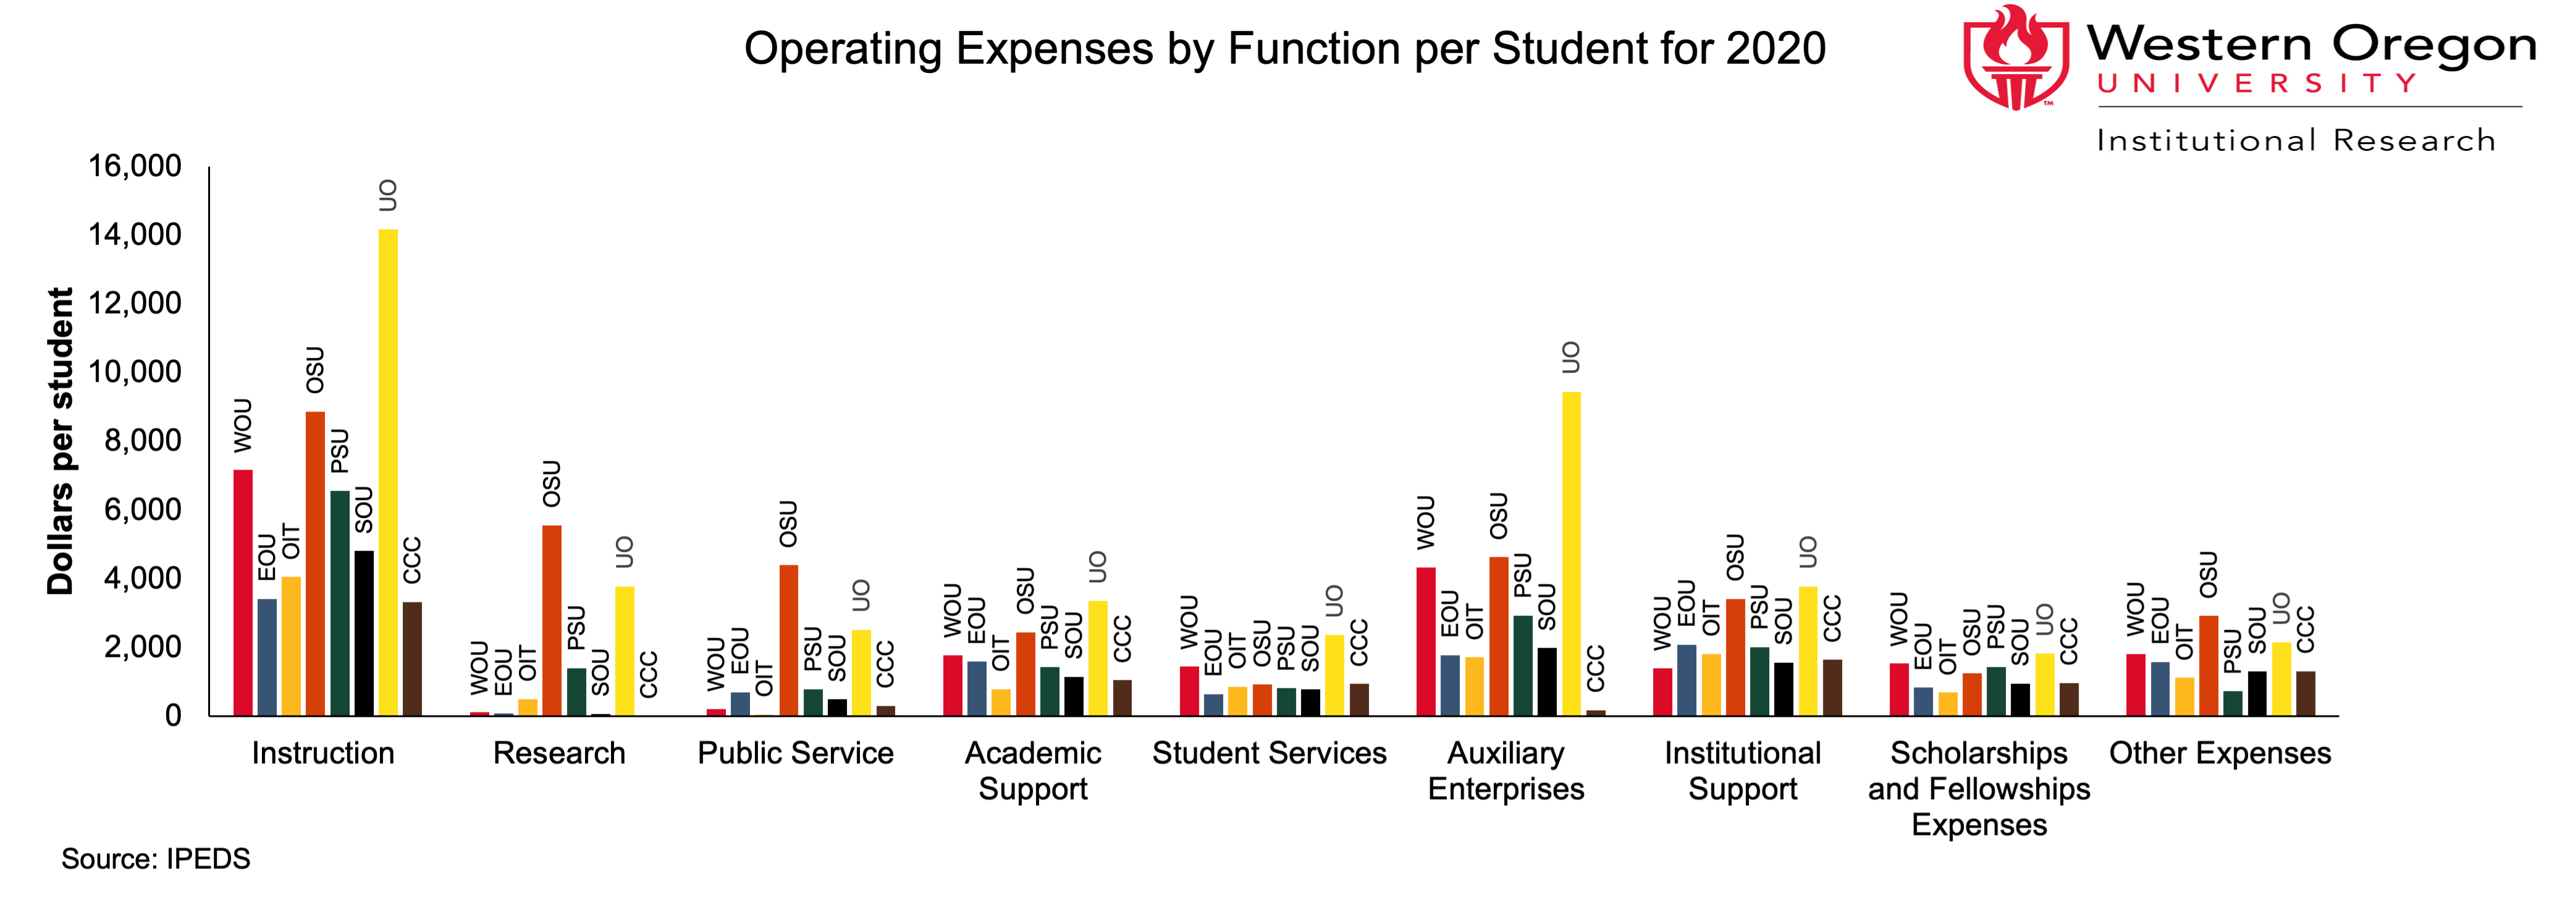 Bar graph of operating expenses per student at WOU and other Oregon Public Universities in 2020, broken out by institution and function